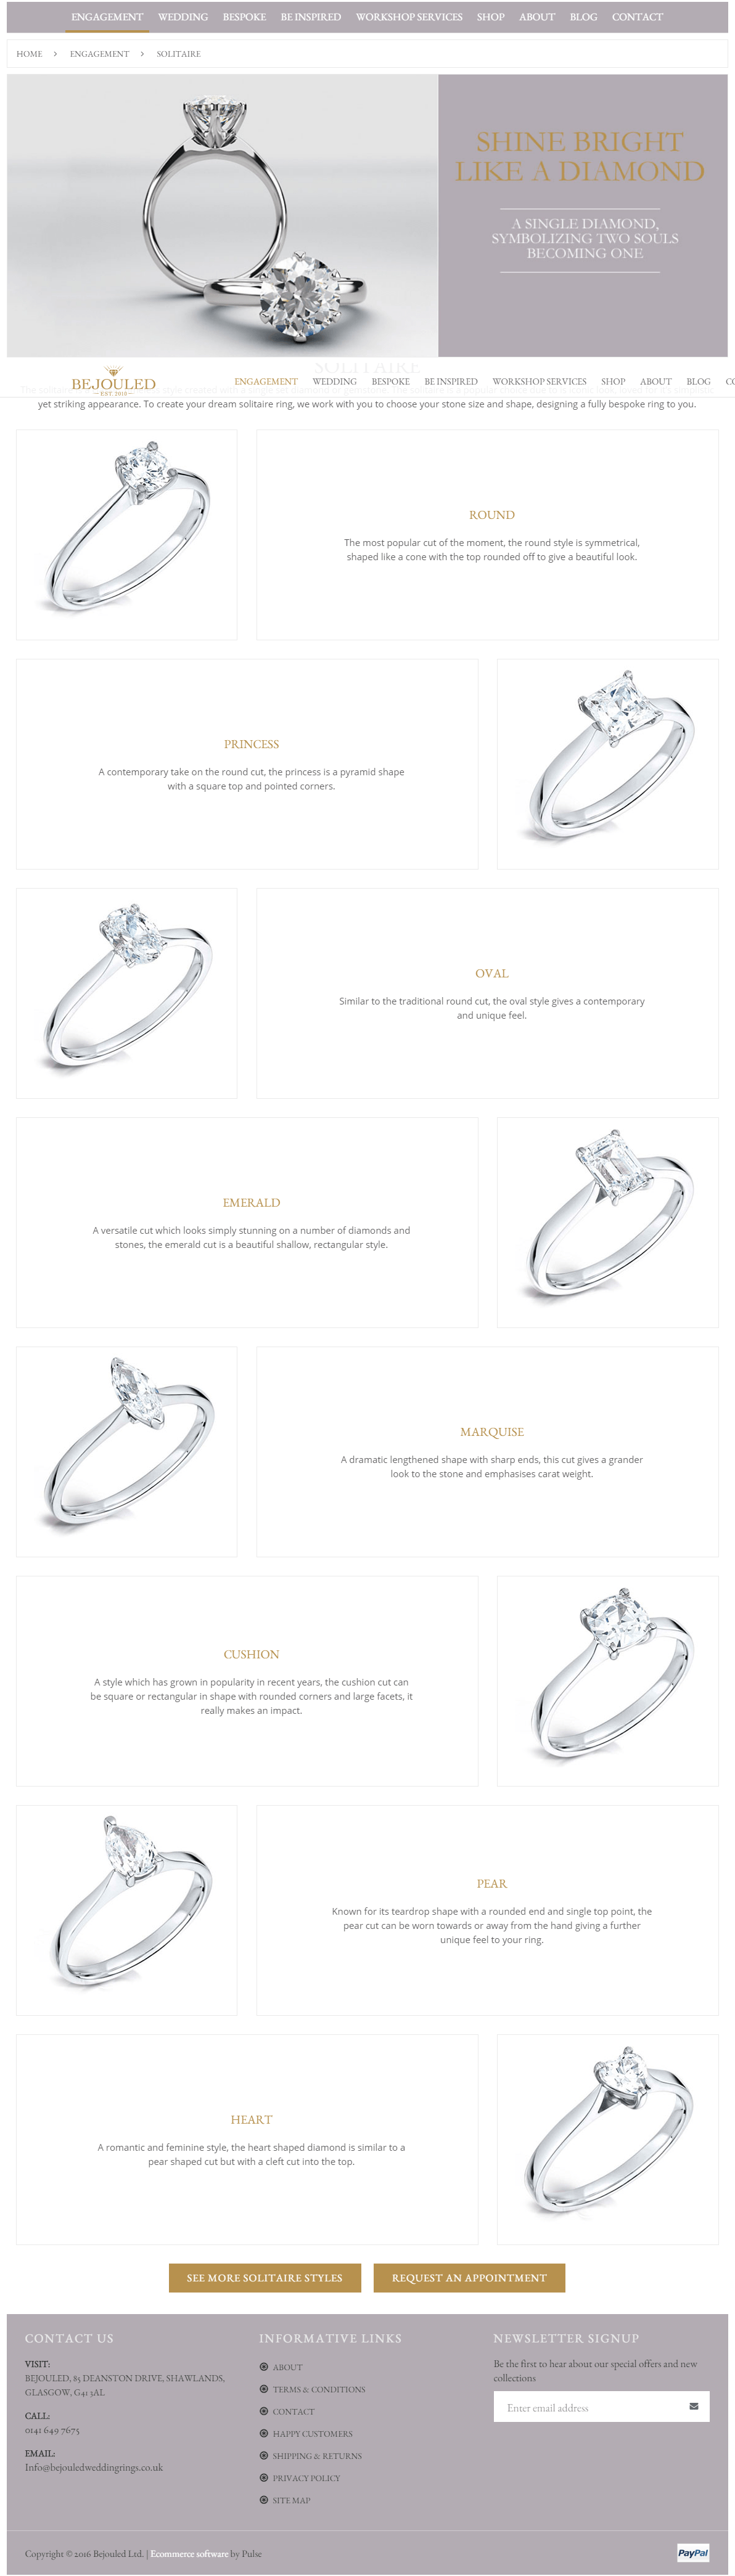 Solitaire engagement rings